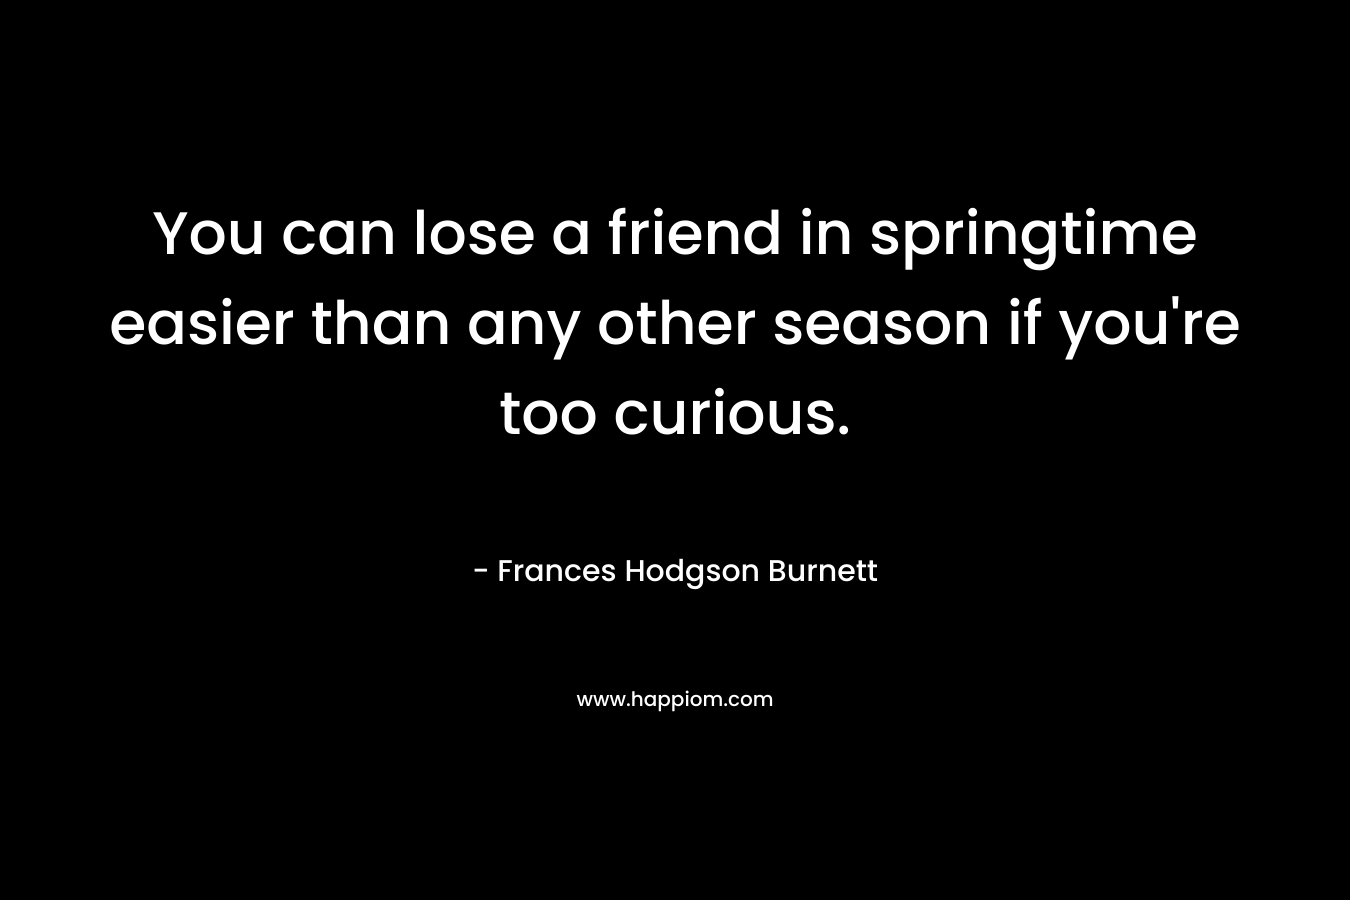 You can lose a friend in springtime easier than any other season if you're too curious.